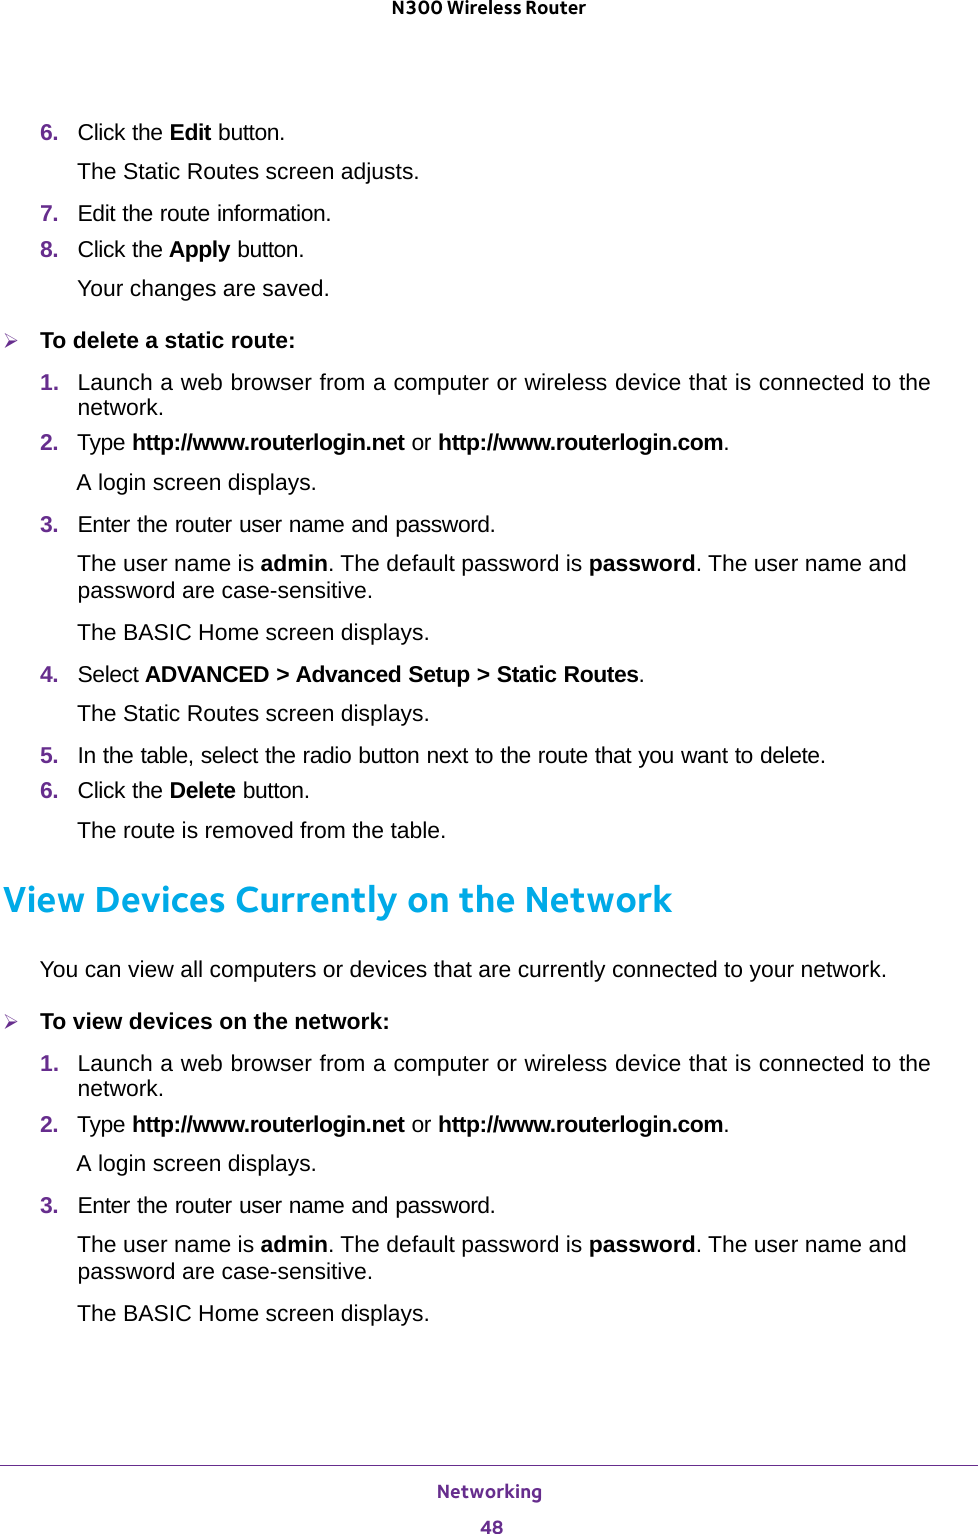 Networking 48N300 Wireless Router 6.  Click the Edit button. The Static Routes screen adjusts.7.  Edit the route information.8.  Click the Apply button.Your changes are saved.To delete a static route:1.  Launch a web browser from a computer or wireless device that is connected to the network.2.  Type http://www.routerlogin.net or http://www.routerlogin.com.A login screen displays.3.  Enter the router user name and password.The user name is admin. The default password is password. The user name and password are case-sensitive.The BASIC Home screen displays.4.  Select ADVANCED &gt; Advanced Setup &gt; Static Routes. The Static Routes screen displays.5.  In the table, select the radio button next to the route that you want to delete.6.  Click the Delete button. The route is removed from the table.View Devices Currently on the NetworkYou can view all computers or devices that are currently connected to your network.To view devices on the network:1.  Launch a web browser from a computer or wireless device that is connected to the network.2.  Type http://www.routerlogin.net or http://www.routerlogin.com.A login screen displays.3.  Enter the router user name and password.The user name is admin. The default password is password. The user name and password are case-sensitive.The BASIC Home screen displays.